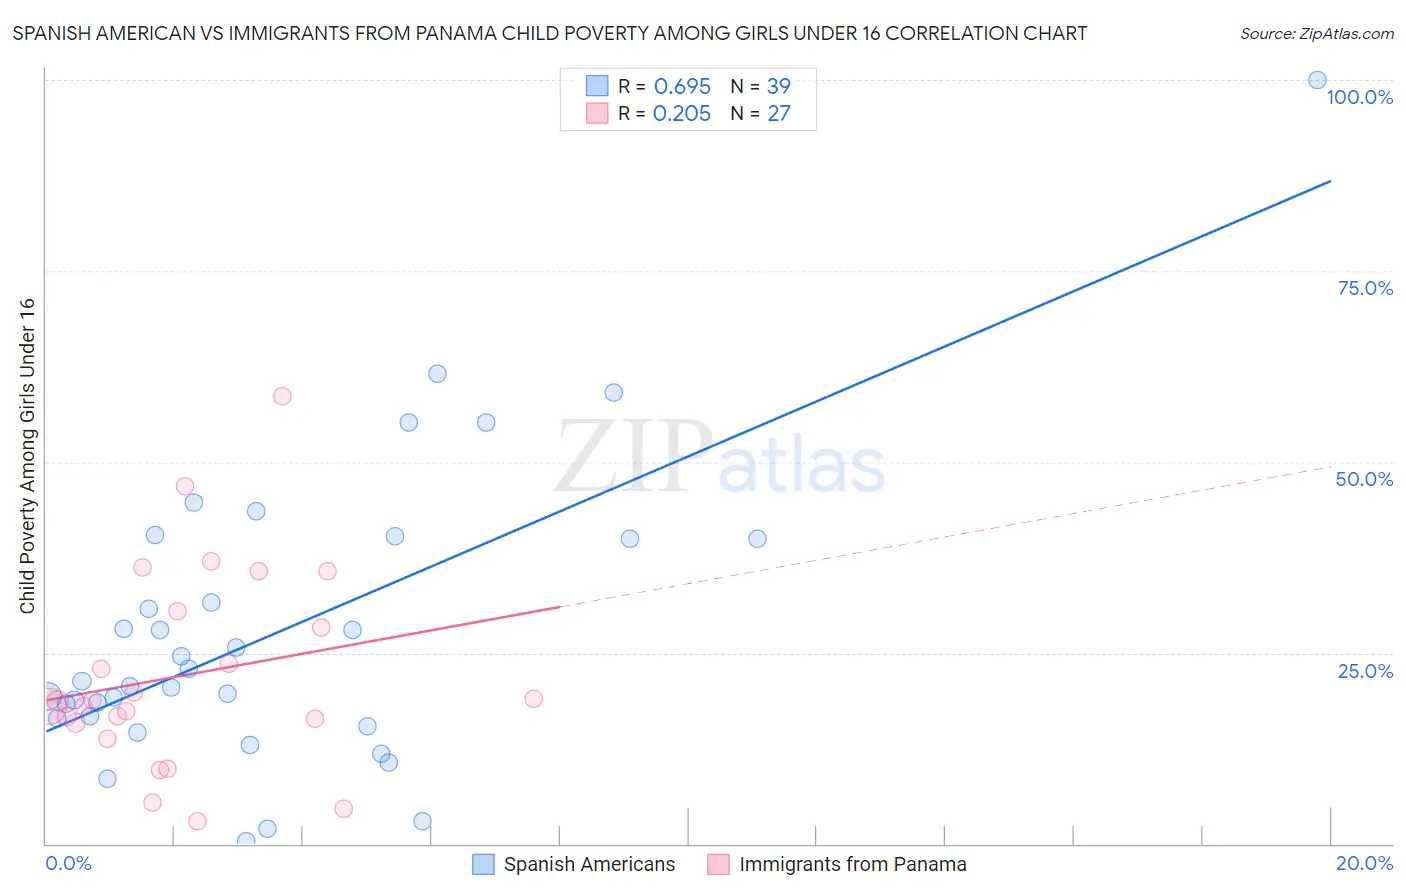 Spanish American vs Immigrants from Panama Child Poverty Among Girls Under 16